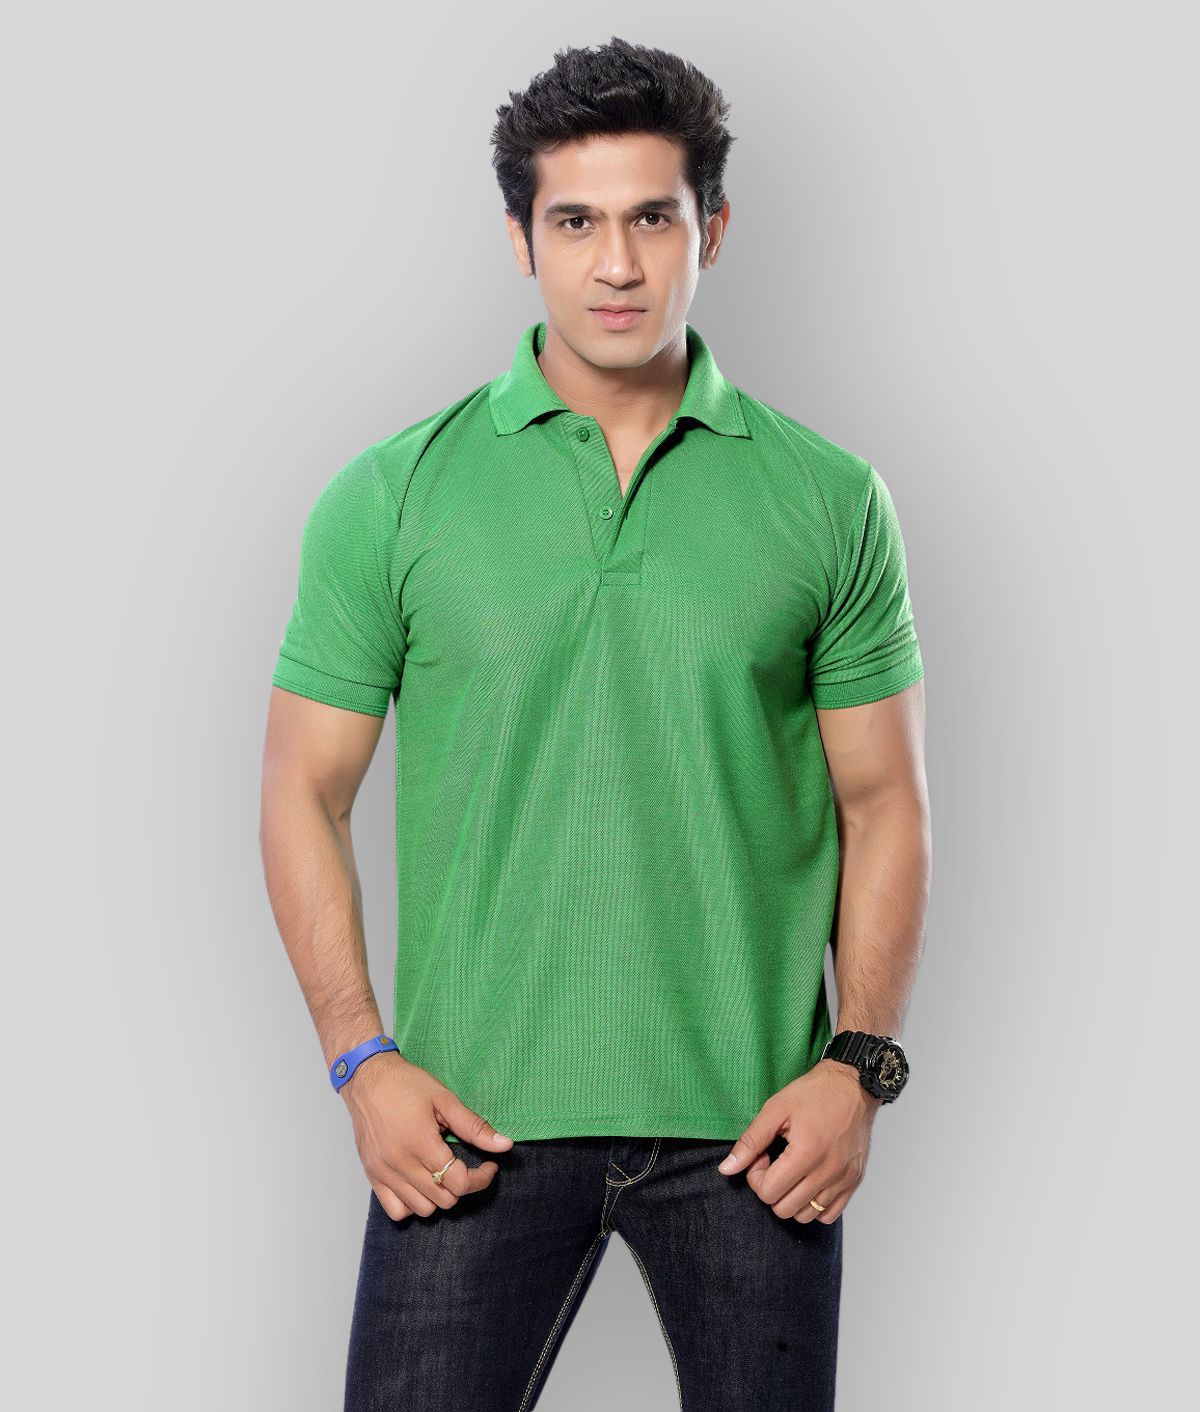     			in365 - Green Cotton Blend Regular Fit Men's Polo T Shirt ( Pack of 1 )